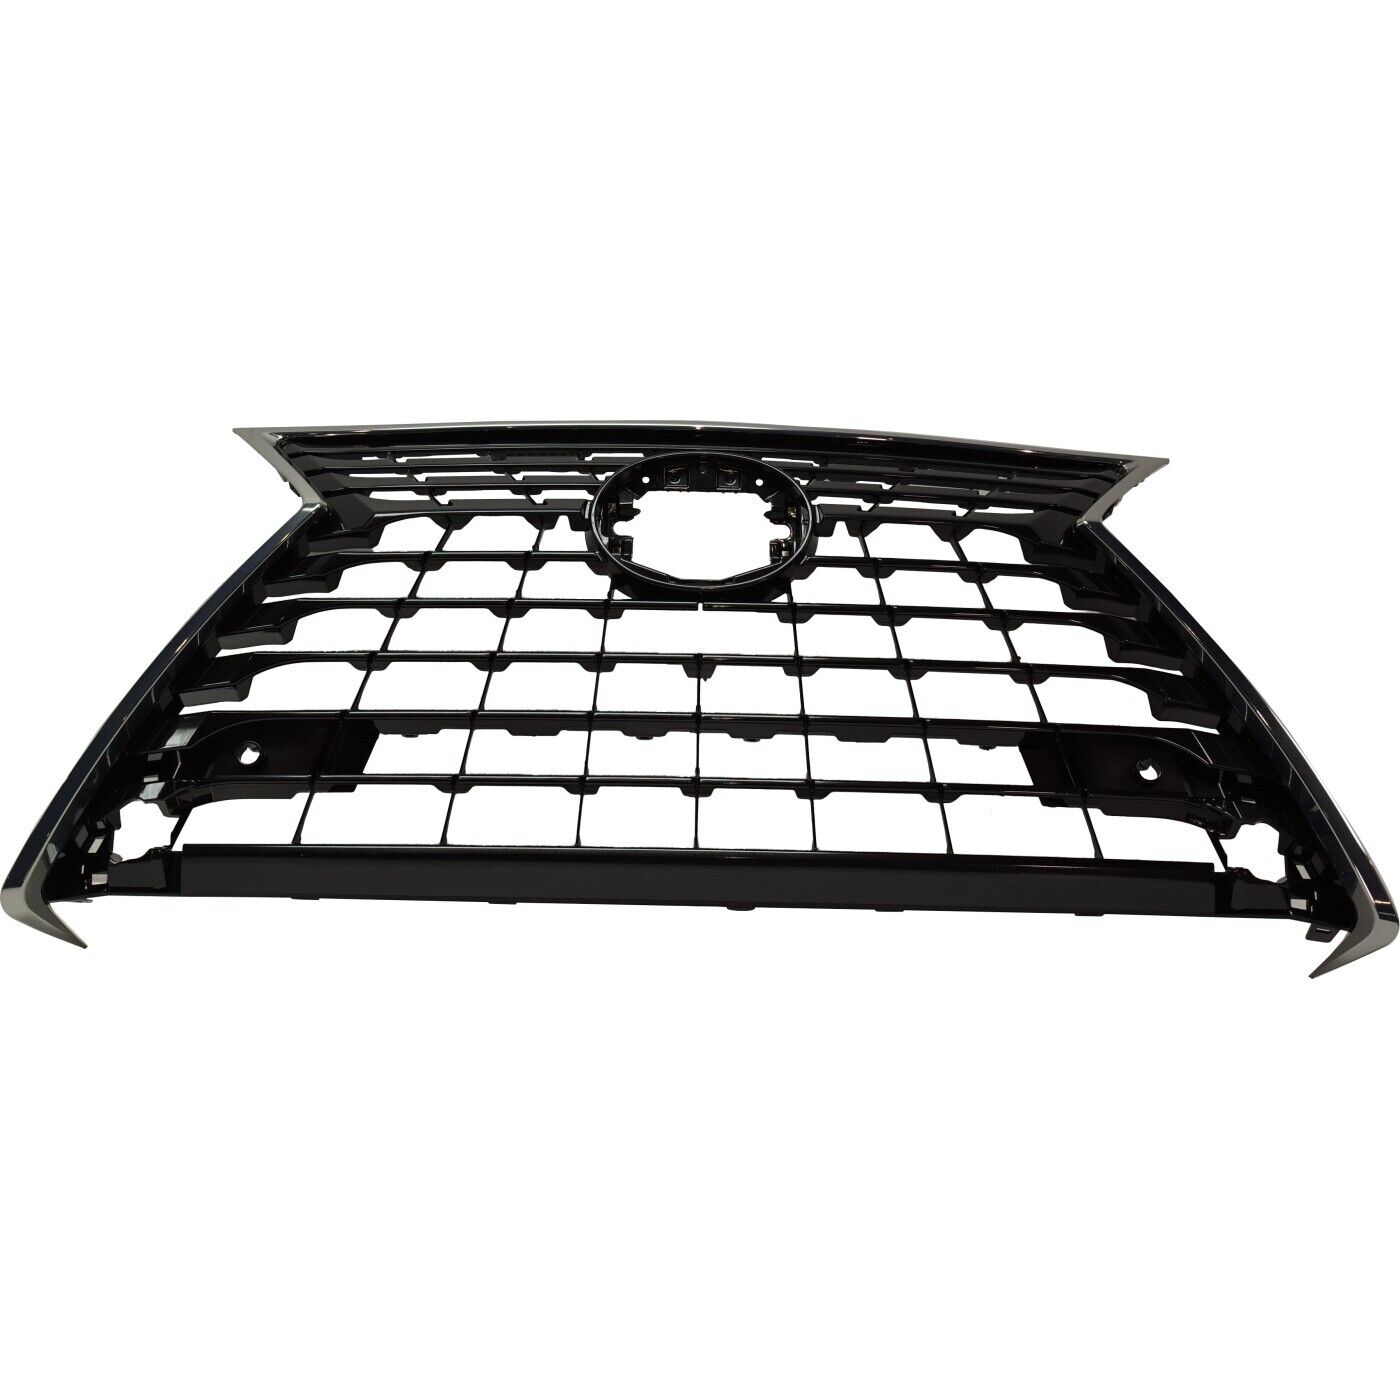 Grille Grill 5310178140 for Lexus NX300h NX300 2018-2019